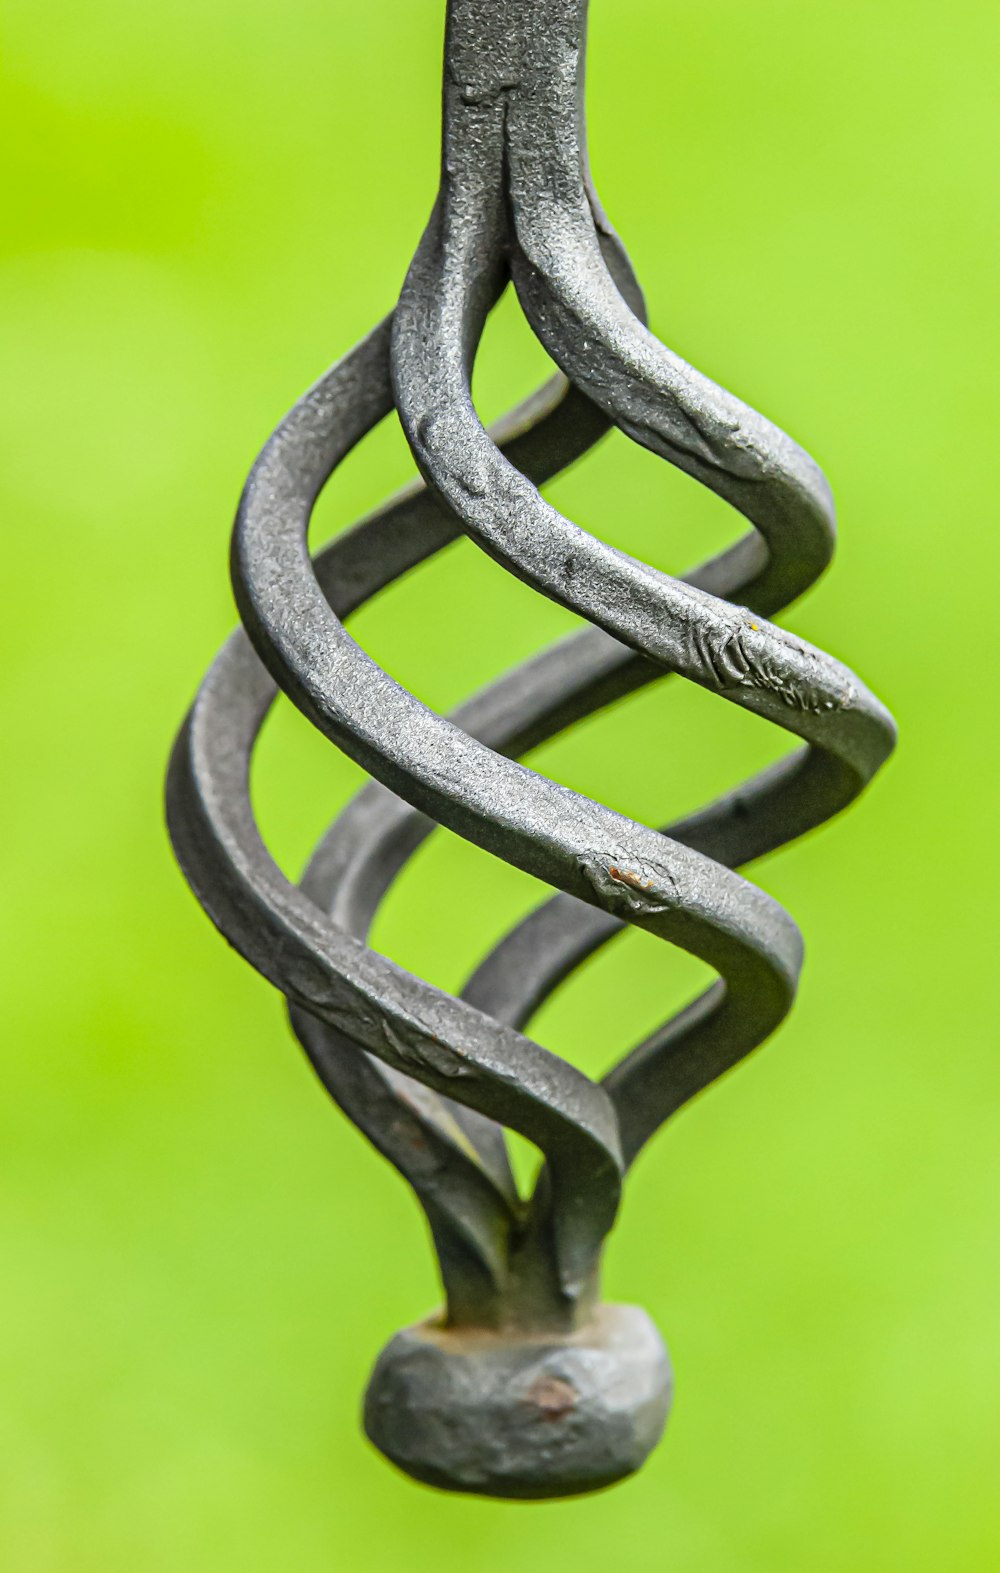 a close up of a metal object with a green background